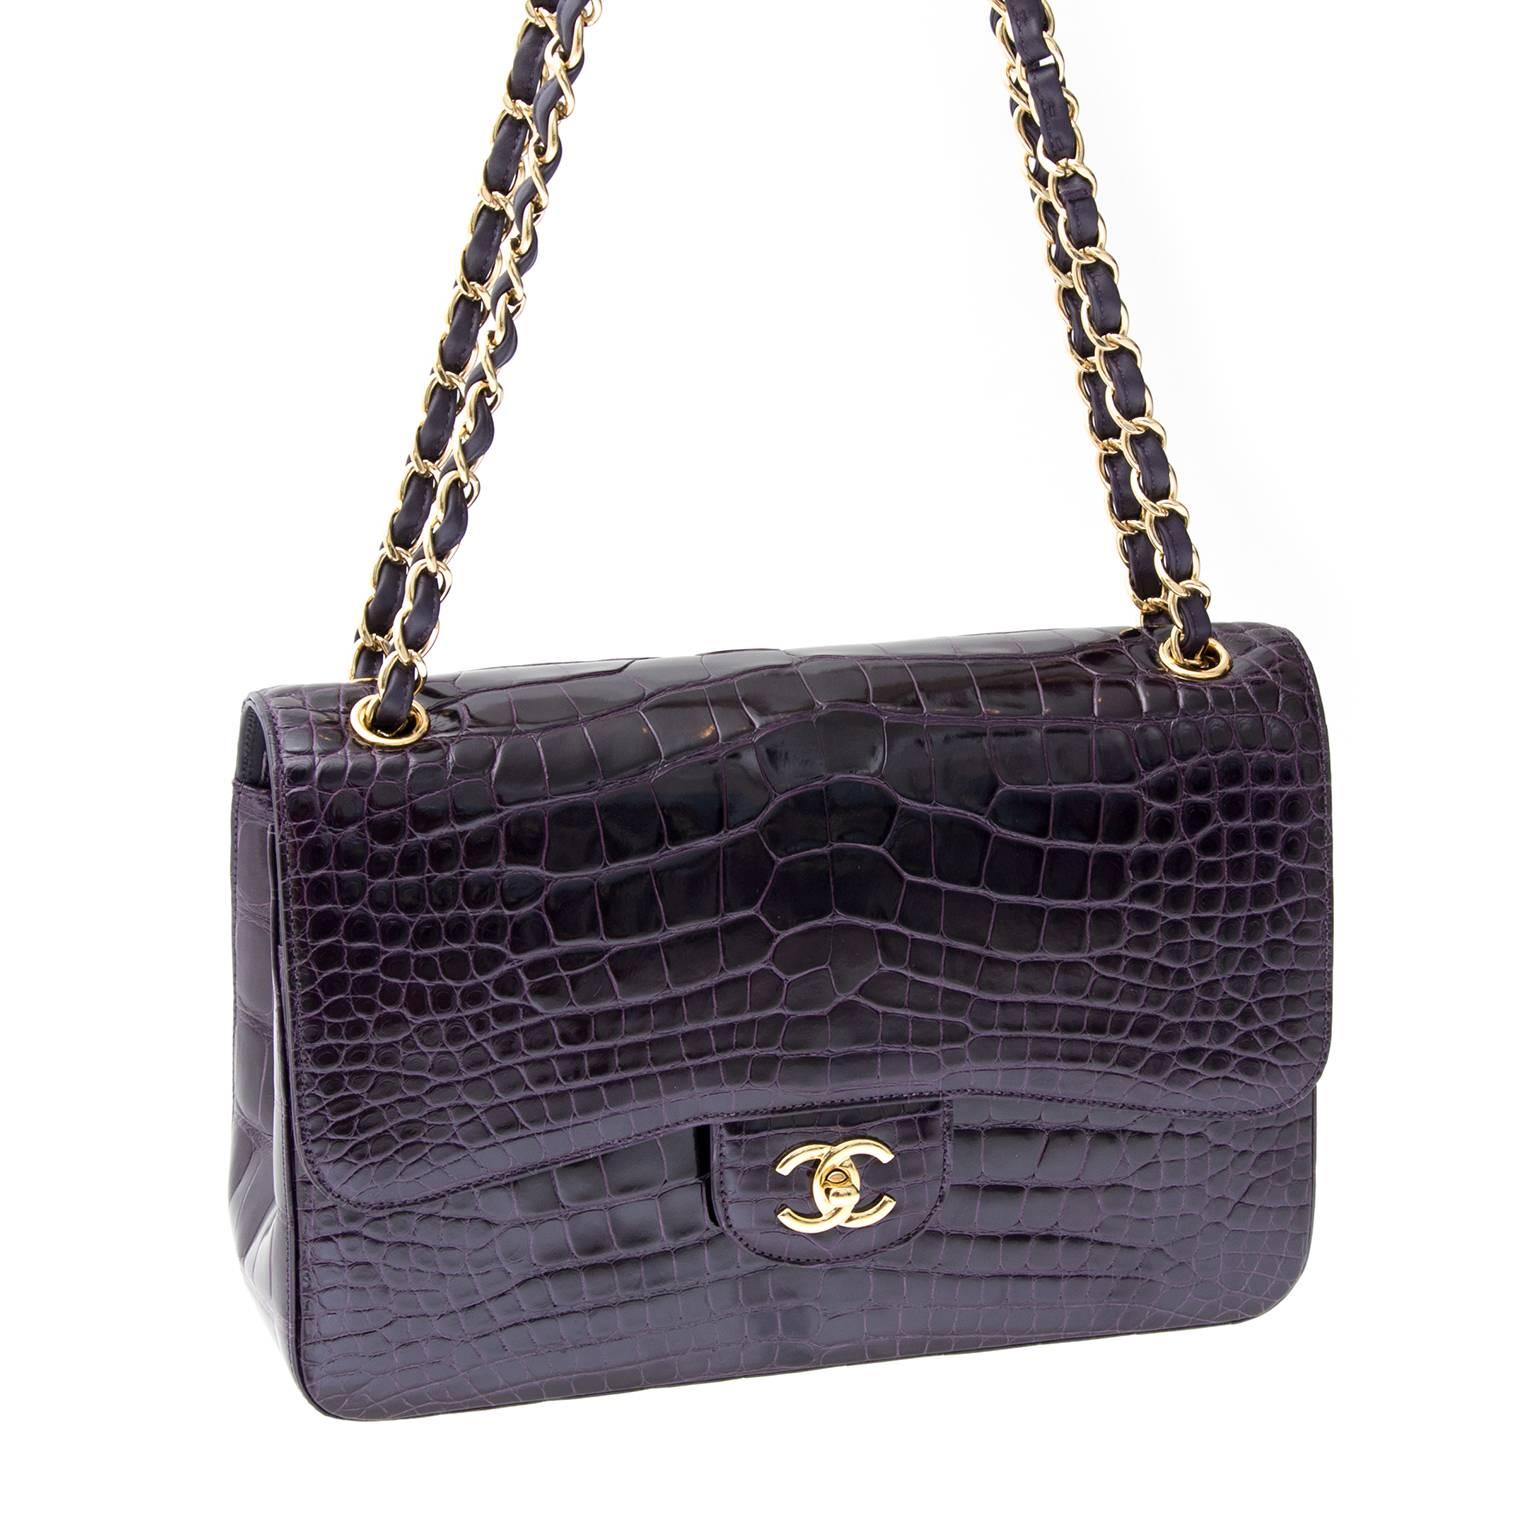 This stunning rare Chanel shoulder flap bag is superbly crafted of luxurious exotic 